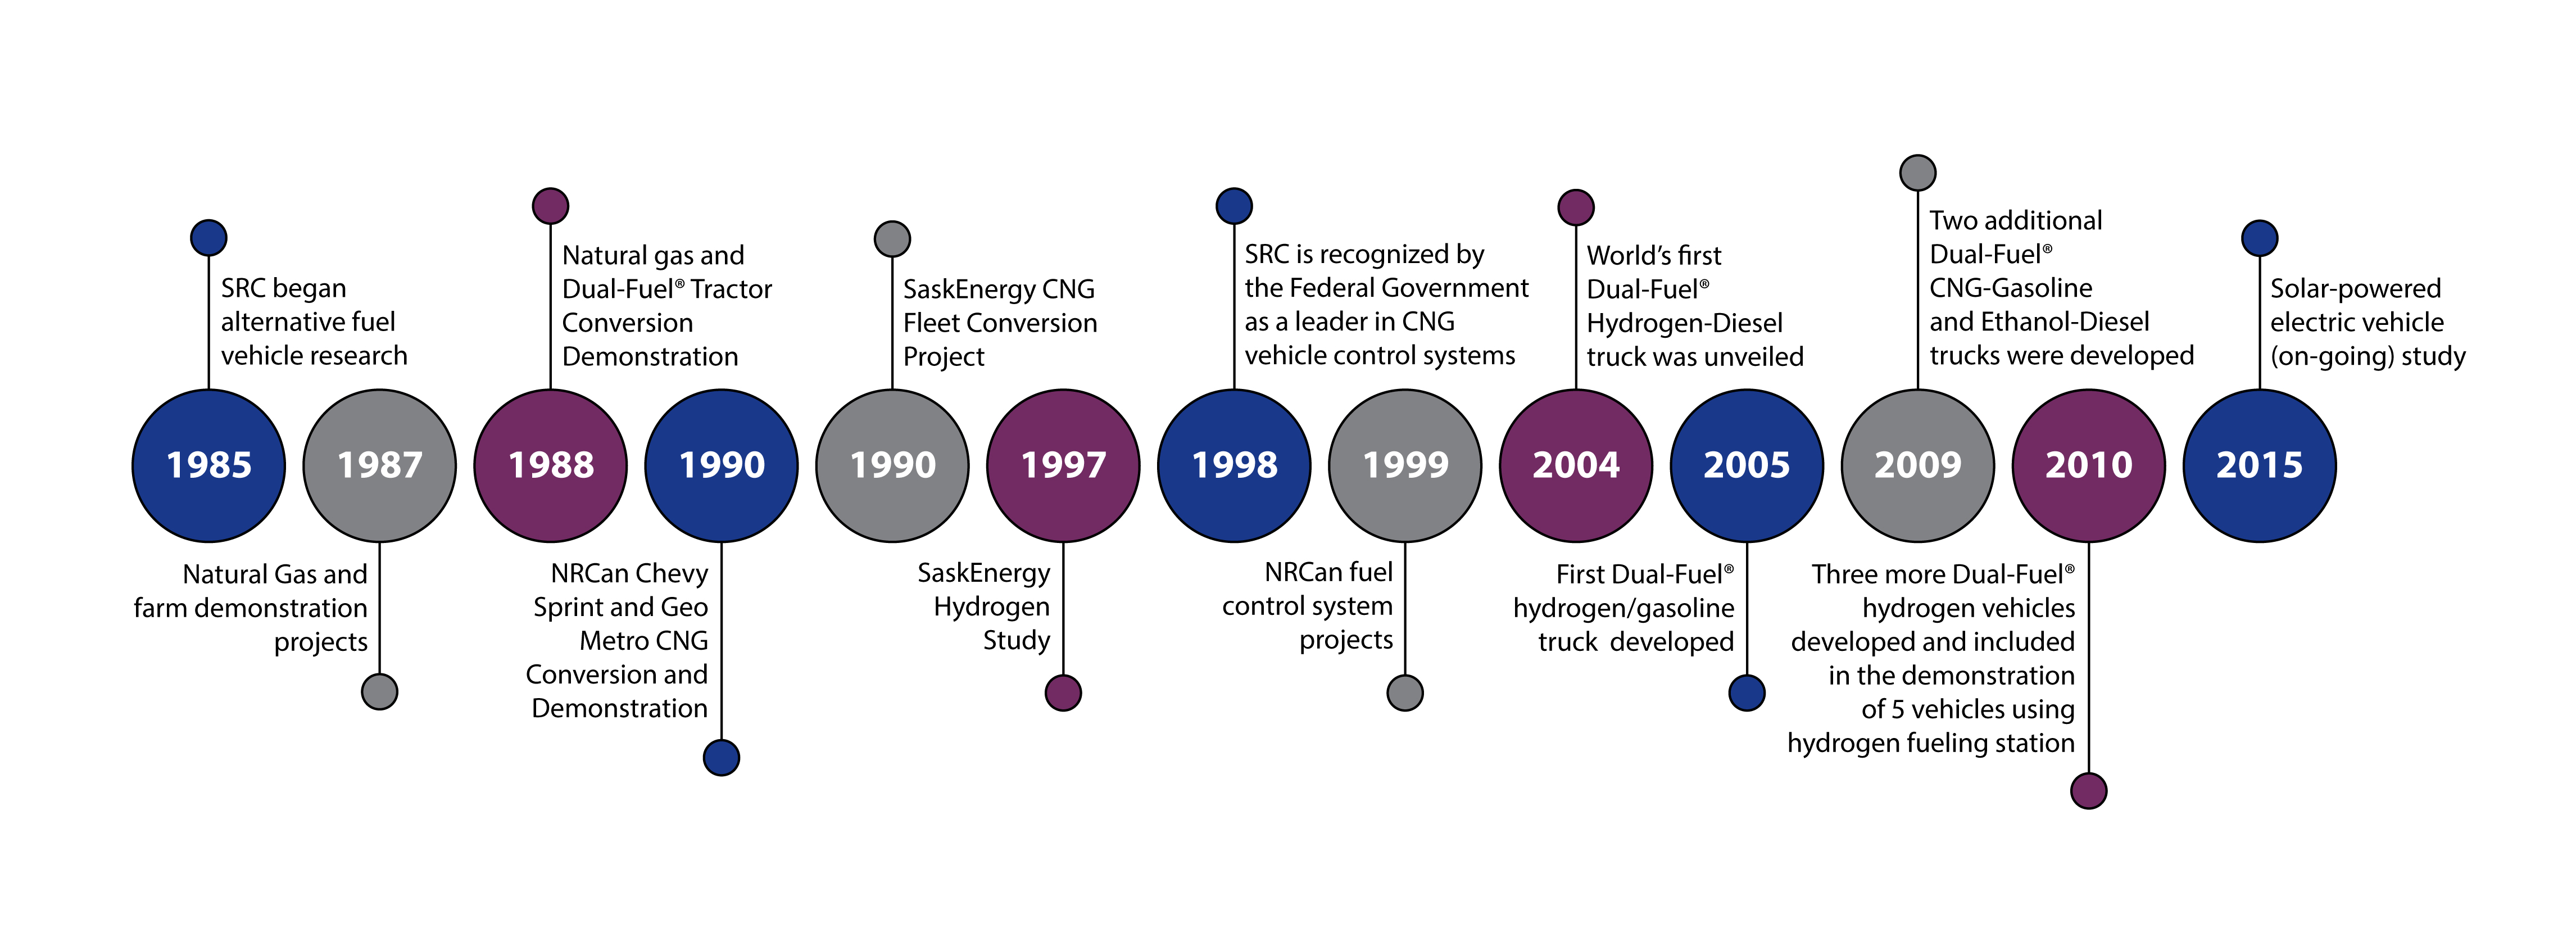 src alternative fuels projects timeline